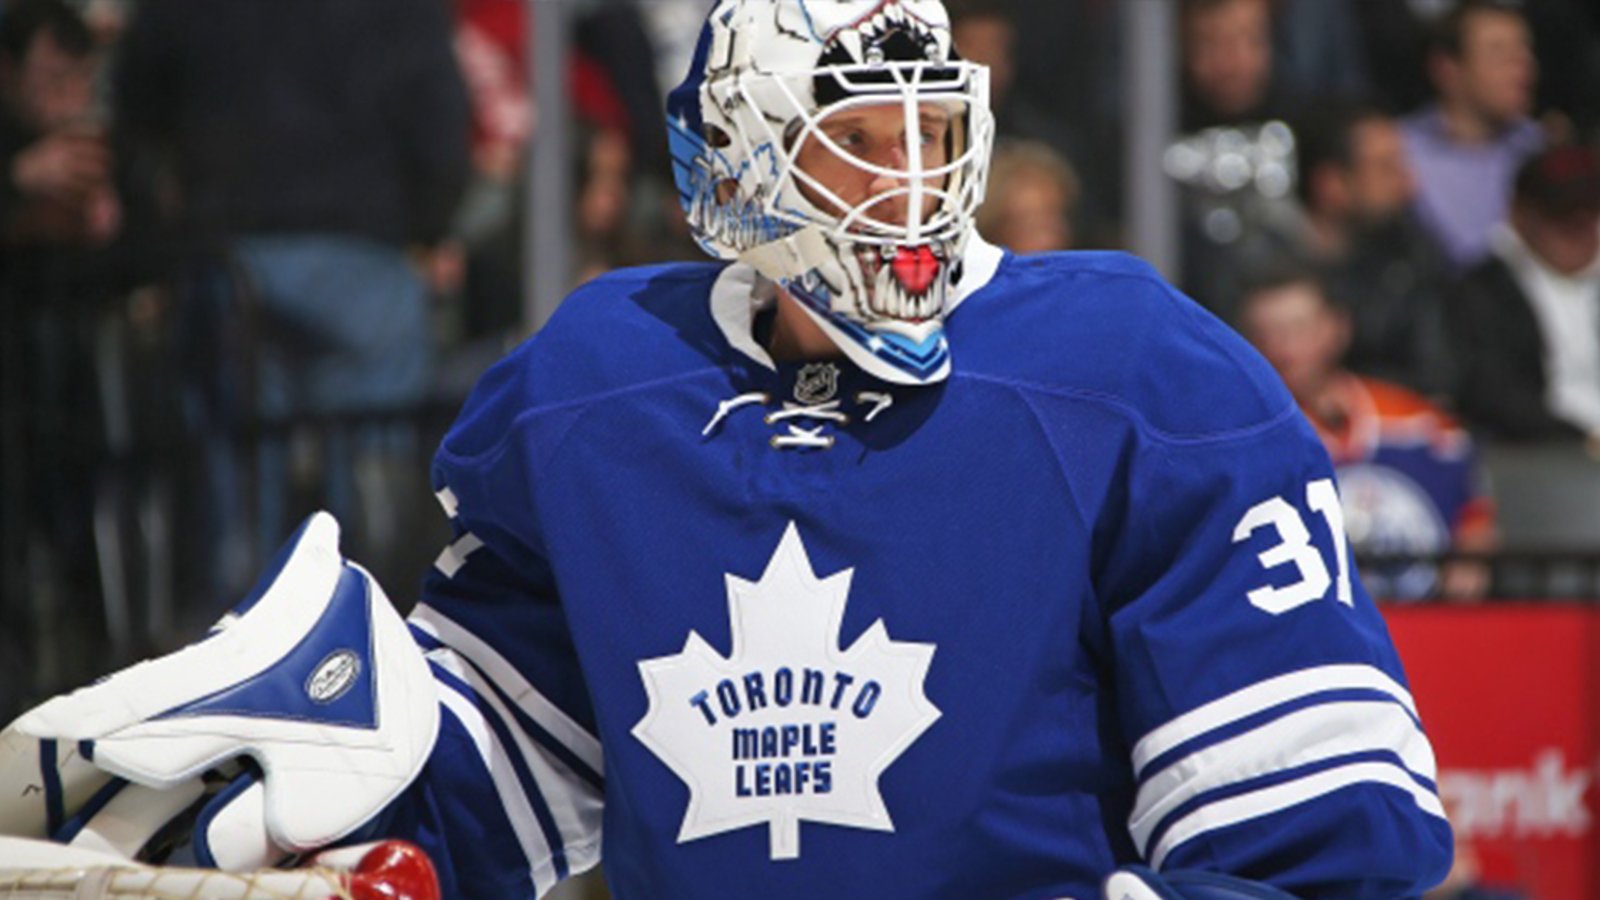 Leafs goalie Sparks calls out NHL for unsafe policies